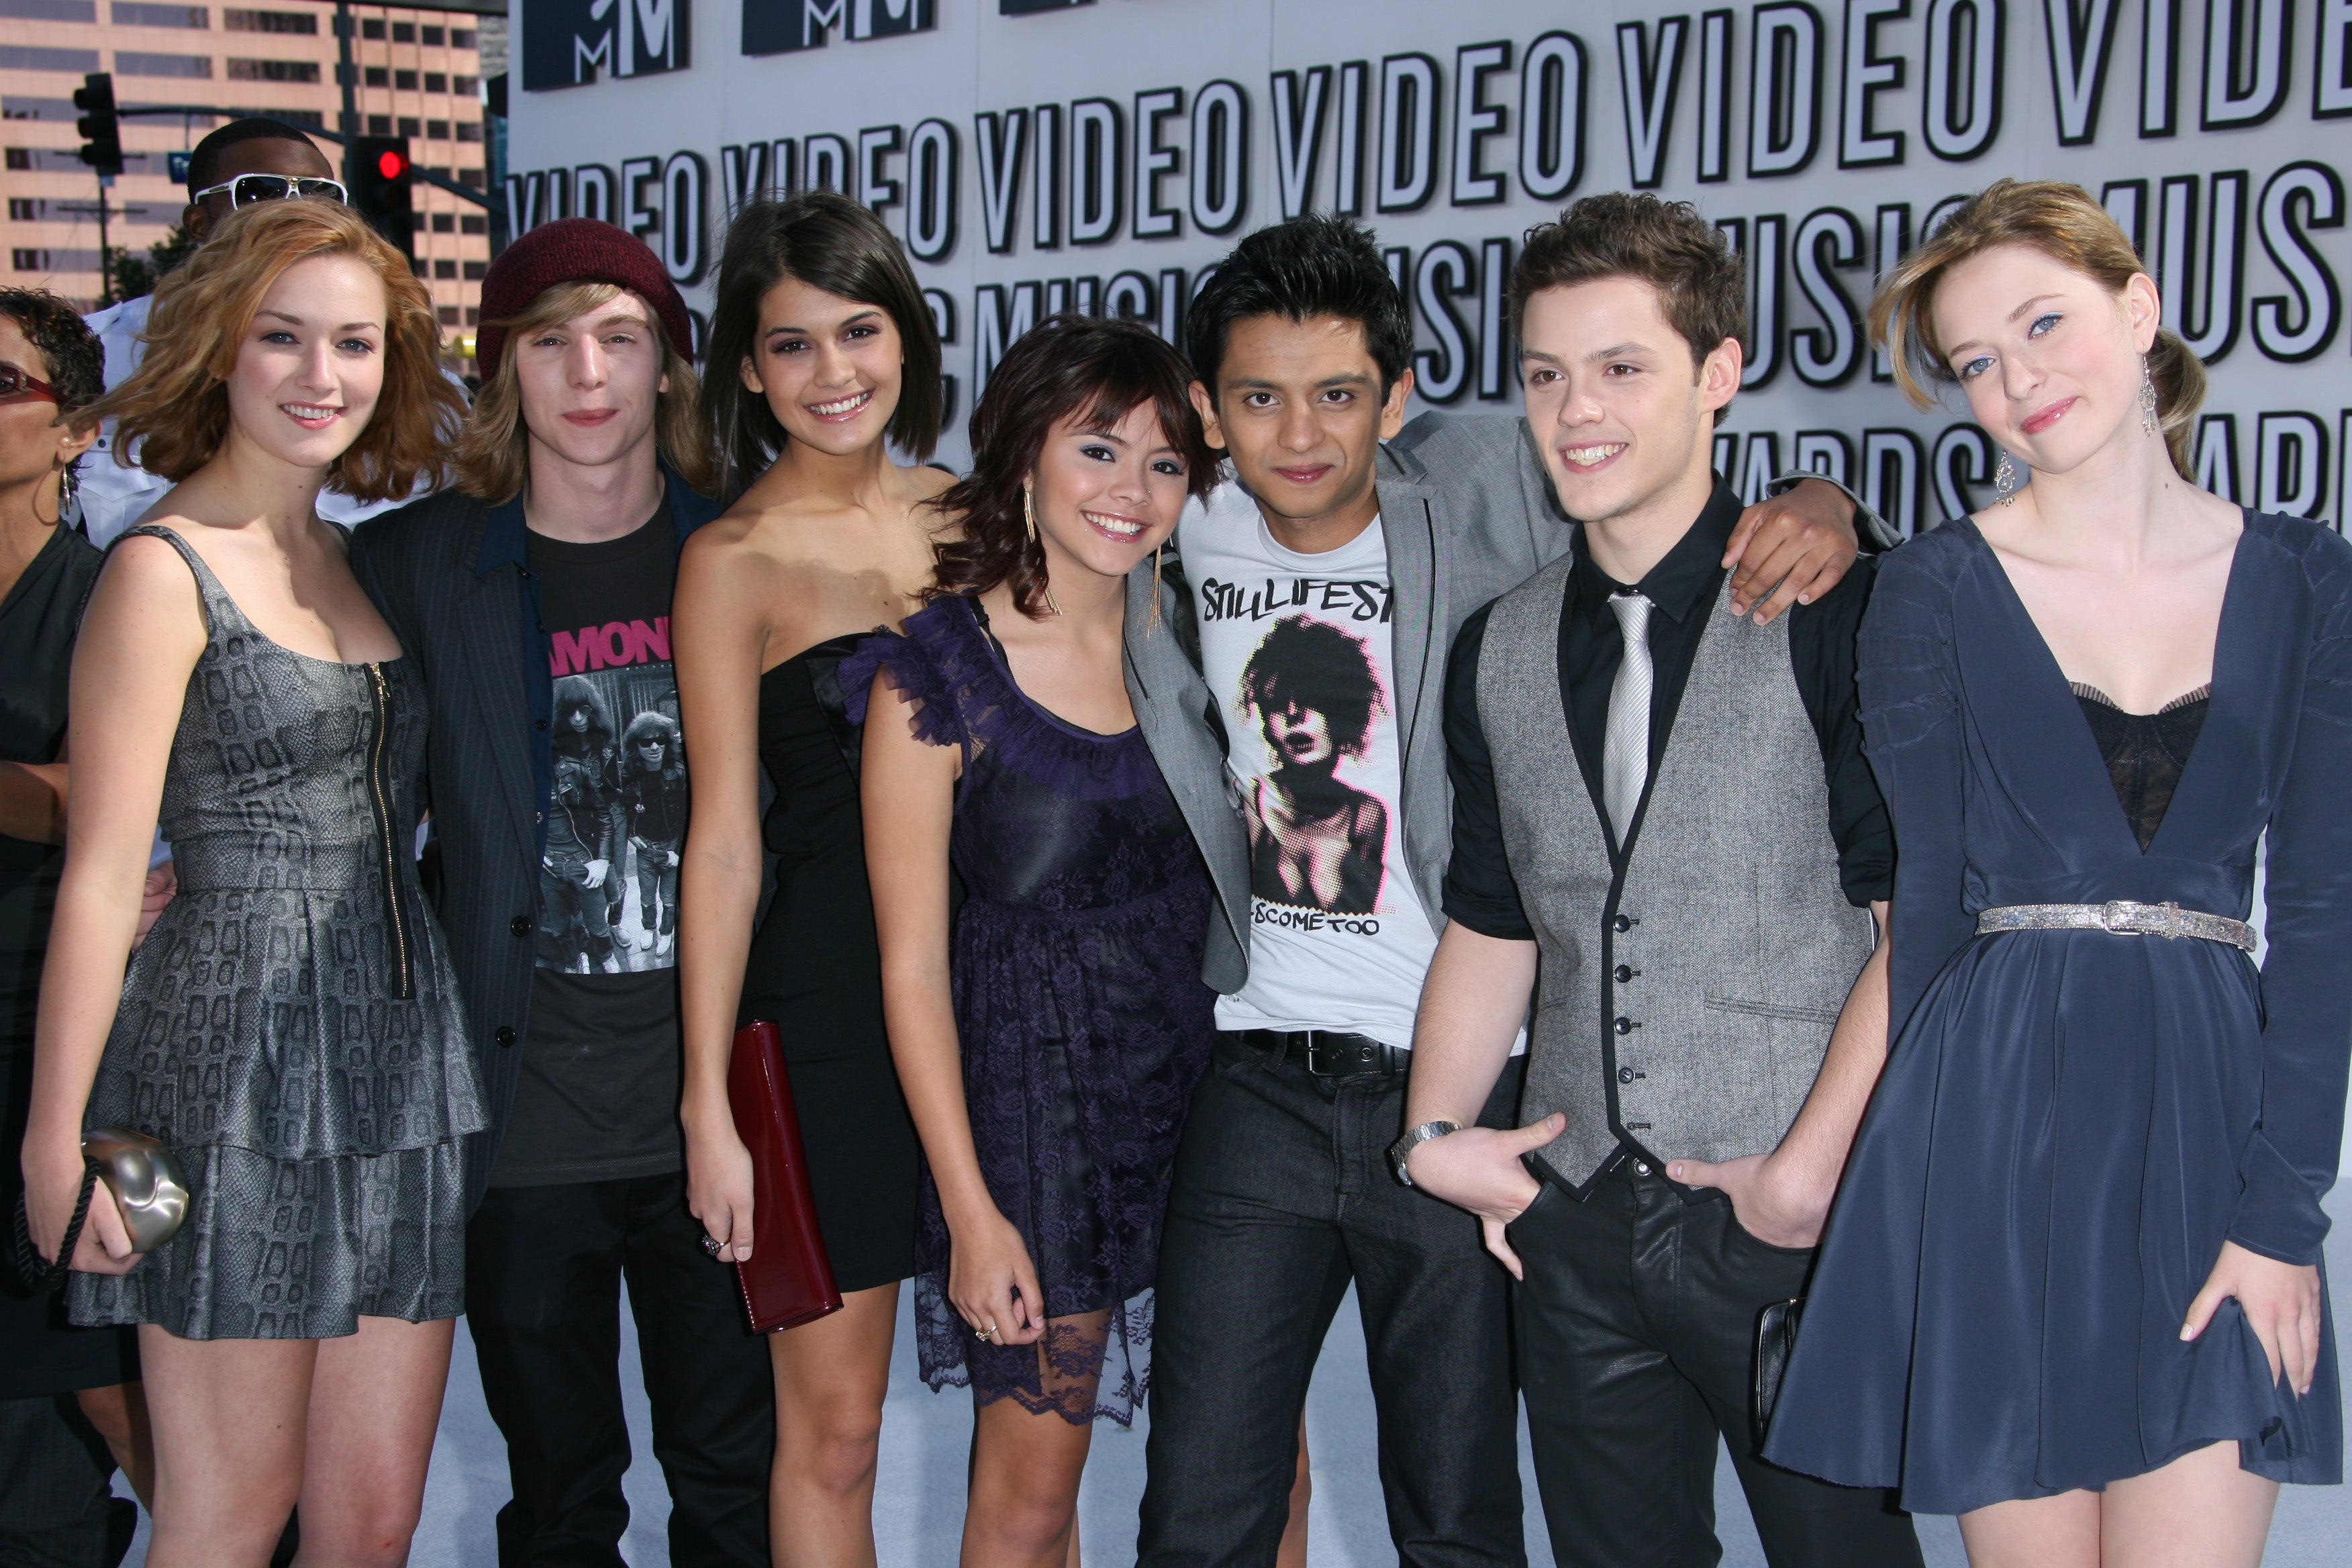 The cast of Skins (US) attend the 2010 MTV Video Music Awards